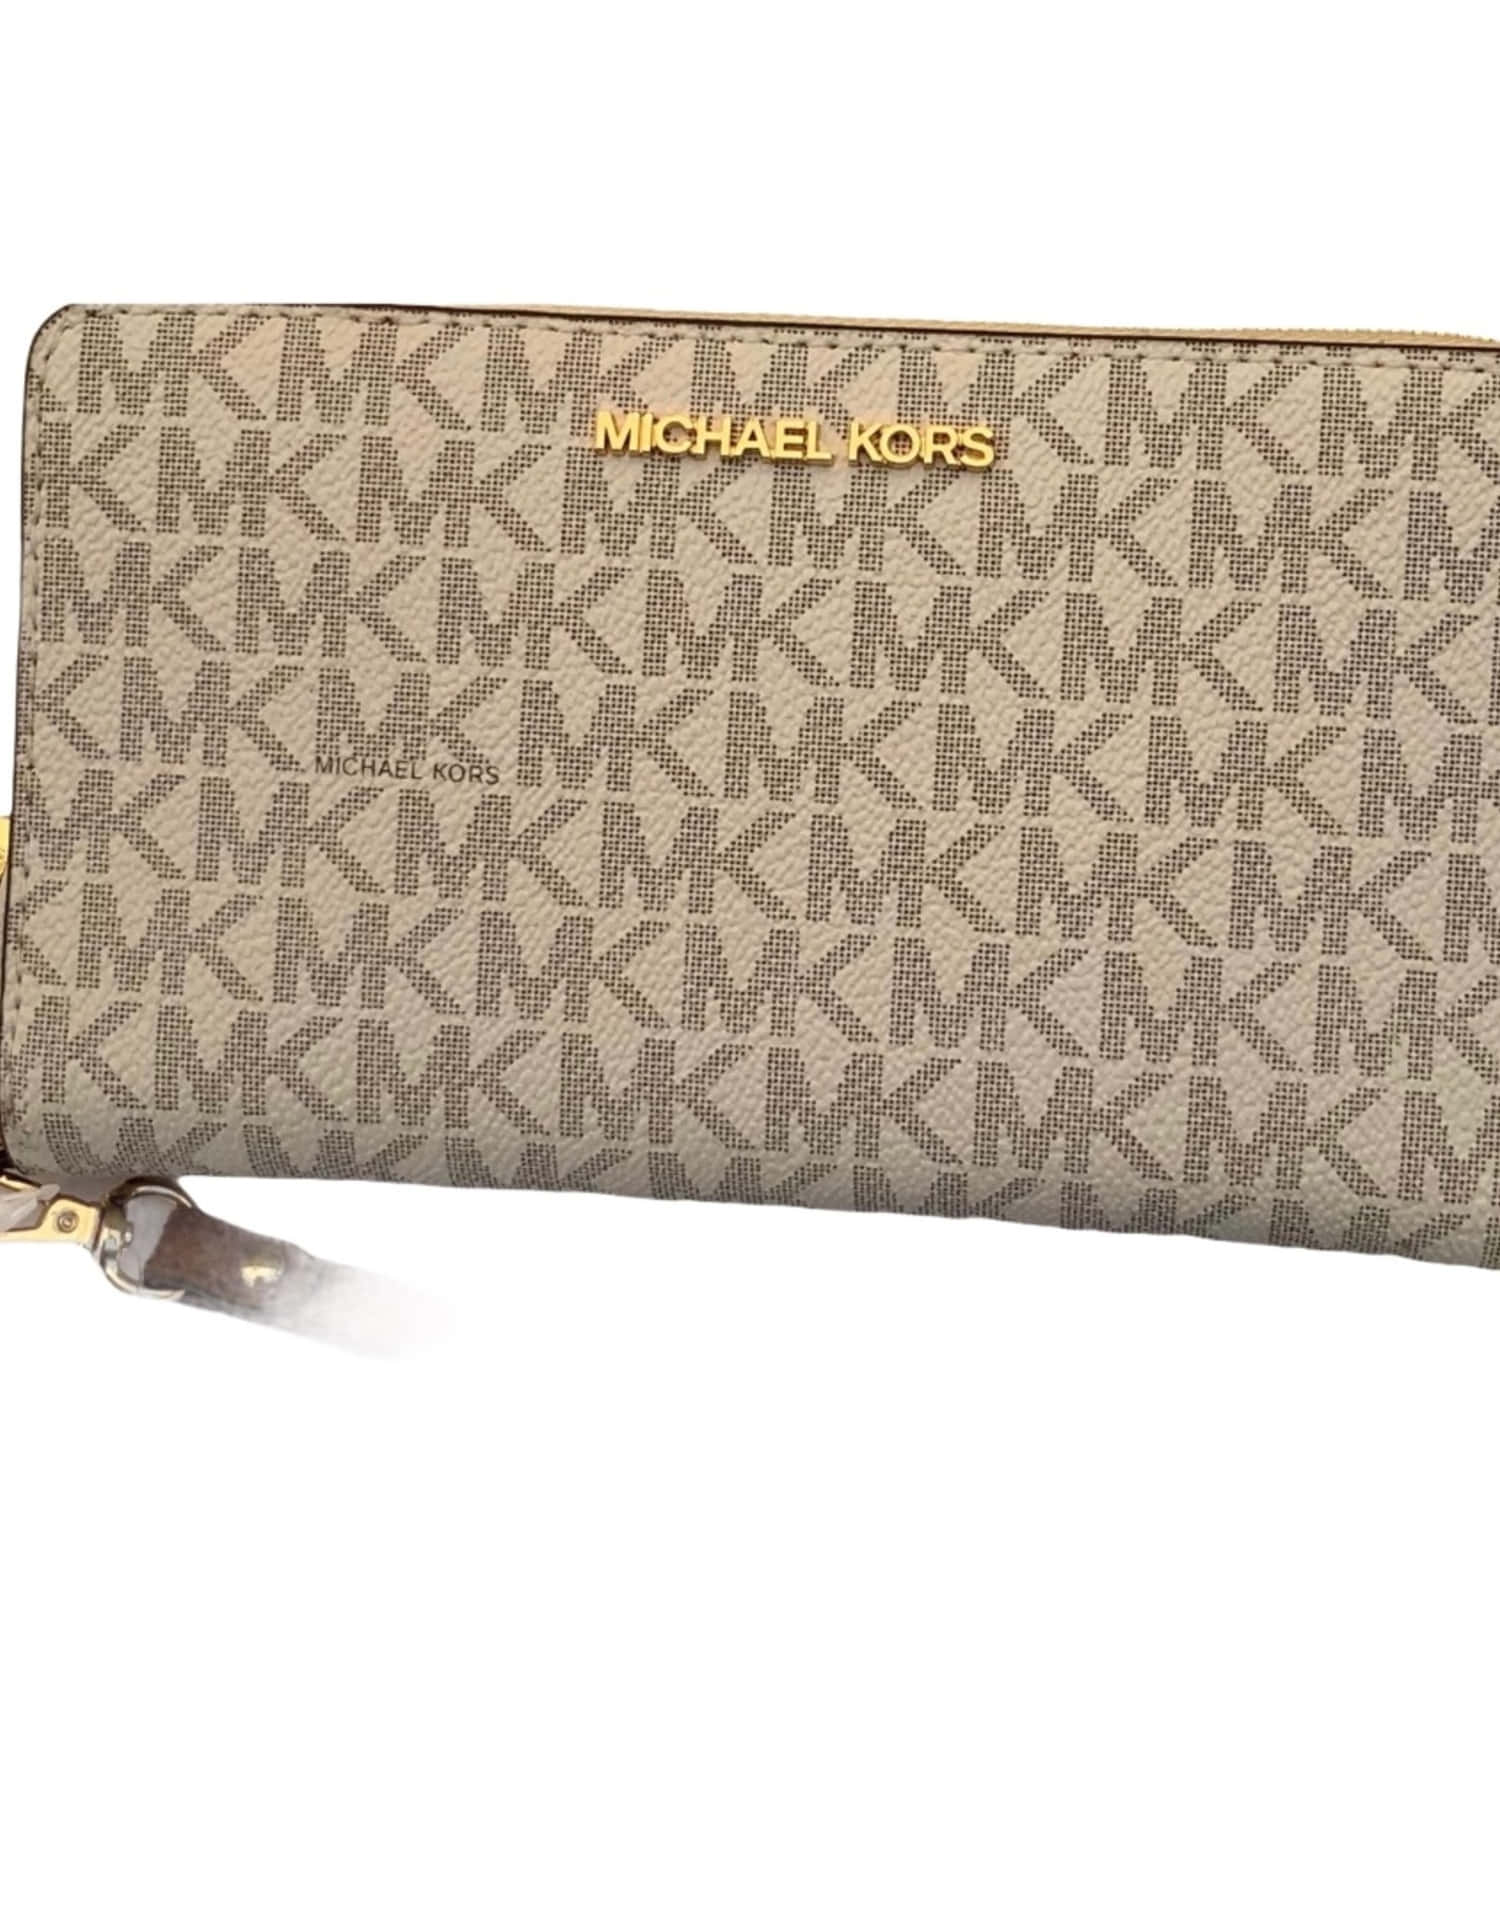 Download Look Sophisticated with Michael Kors | Wallpapers.com